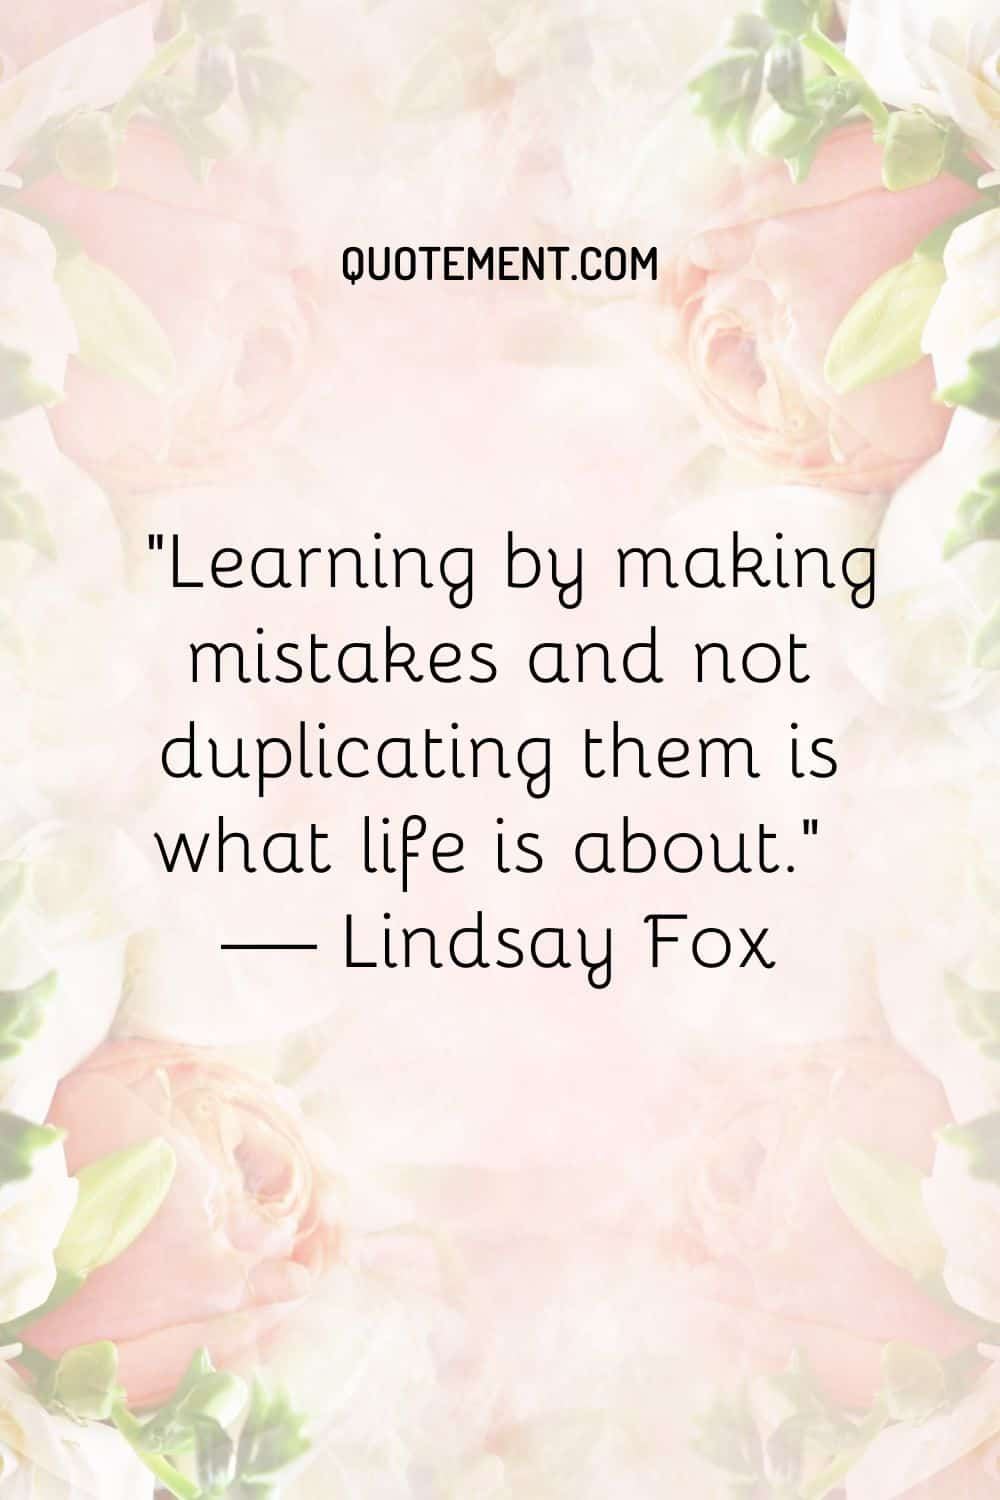 Learning by making mistakes and not duplicating them is what life is about.